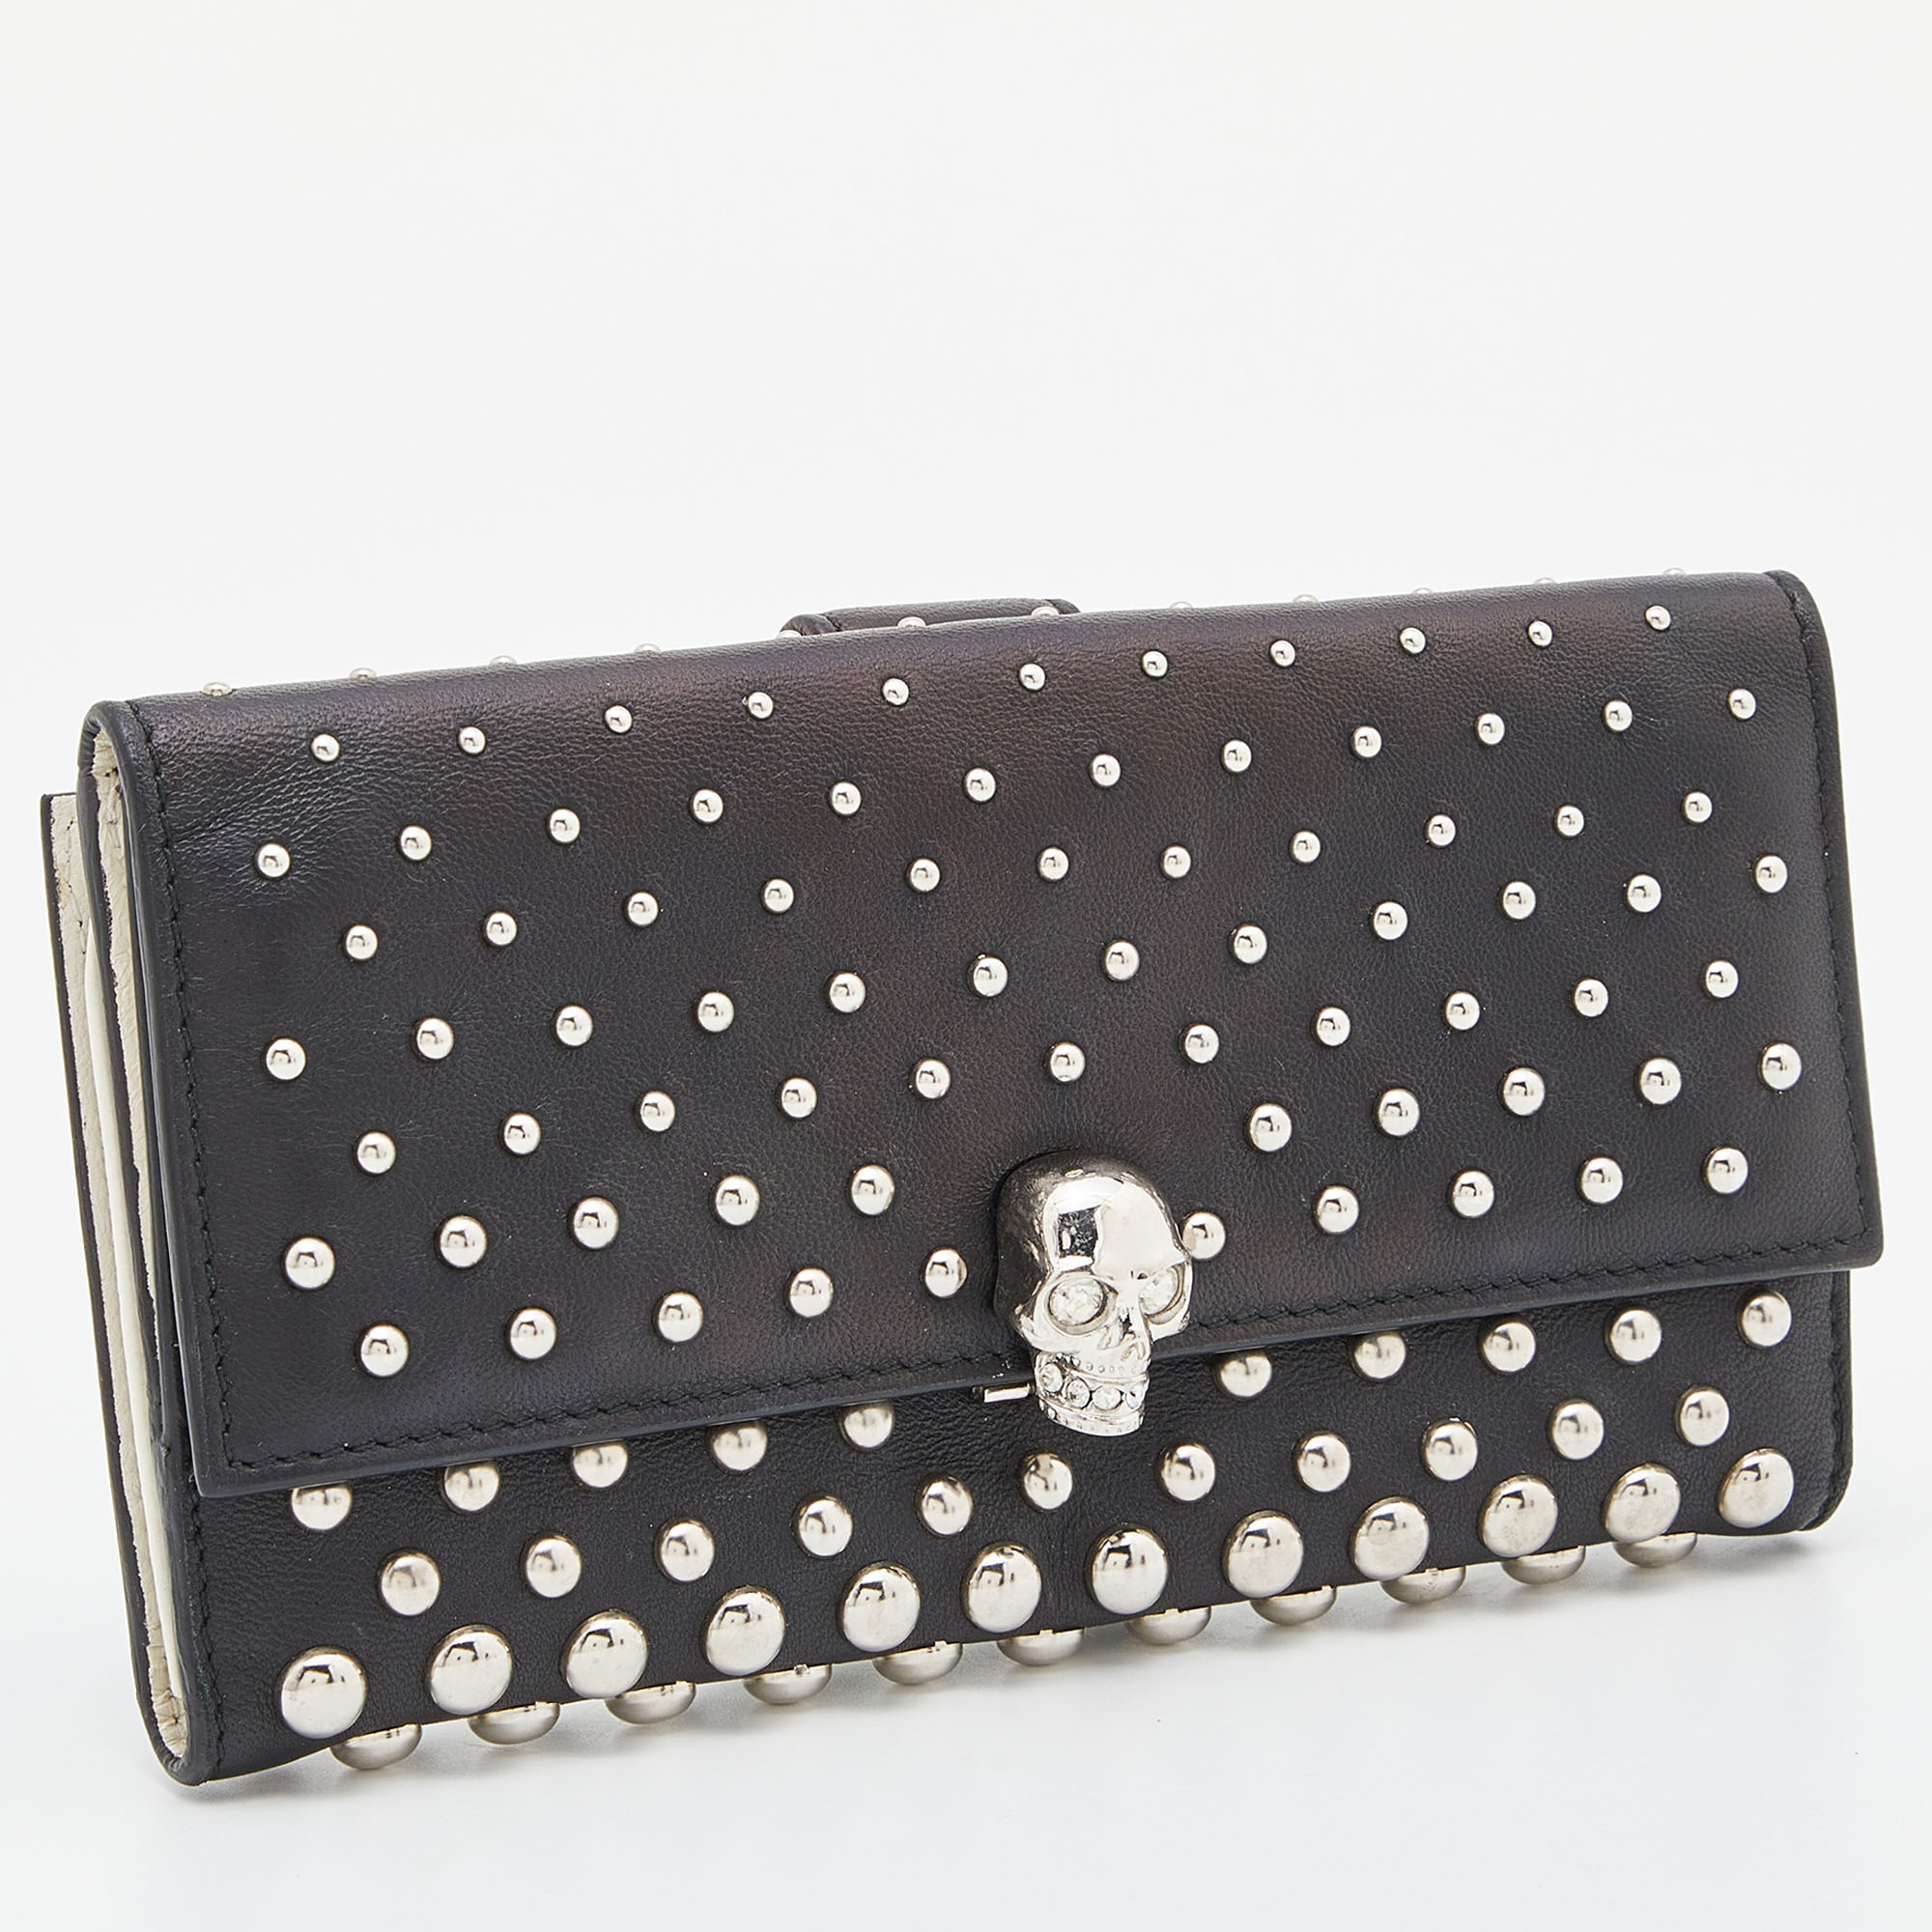 Alexander McQueen Black Leather Studded Skull French Wallet